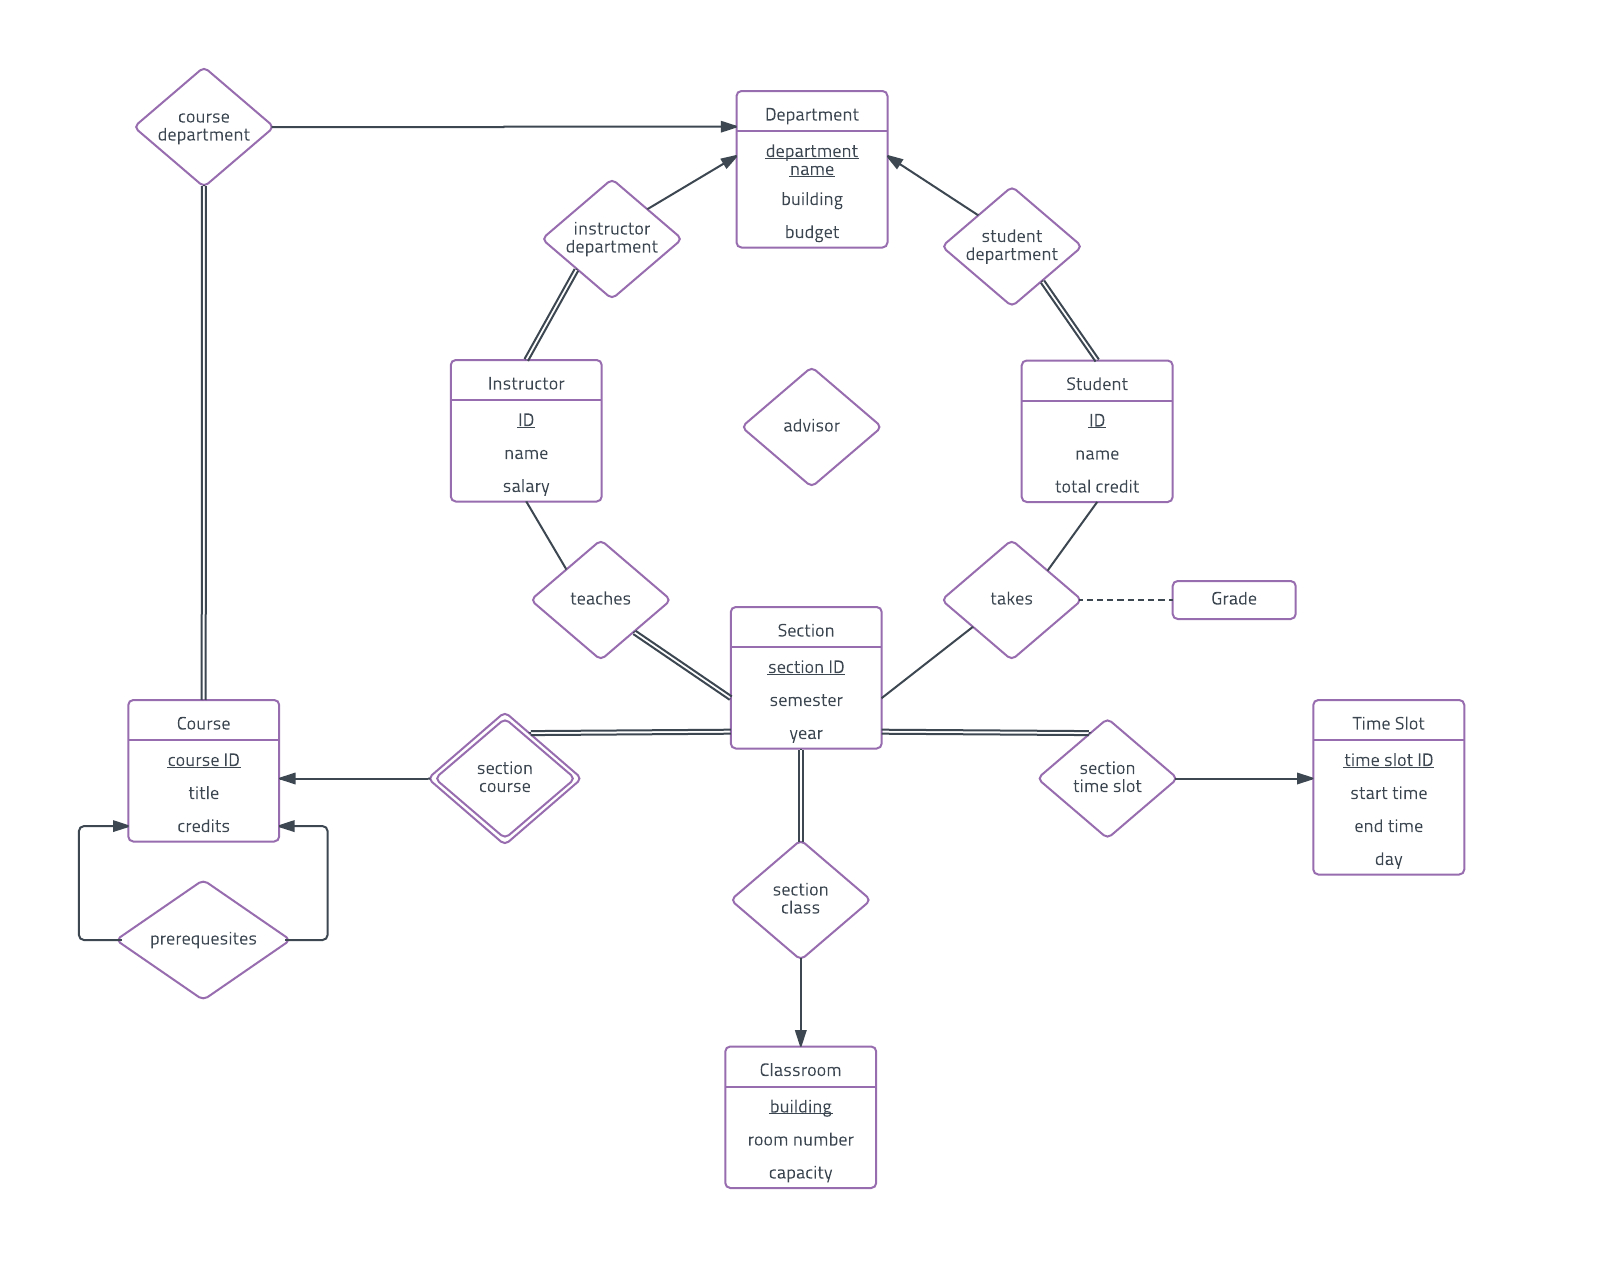 Er Diagram Examples And Templates | Lucidchart throughout Er Diagram Basic Concepts